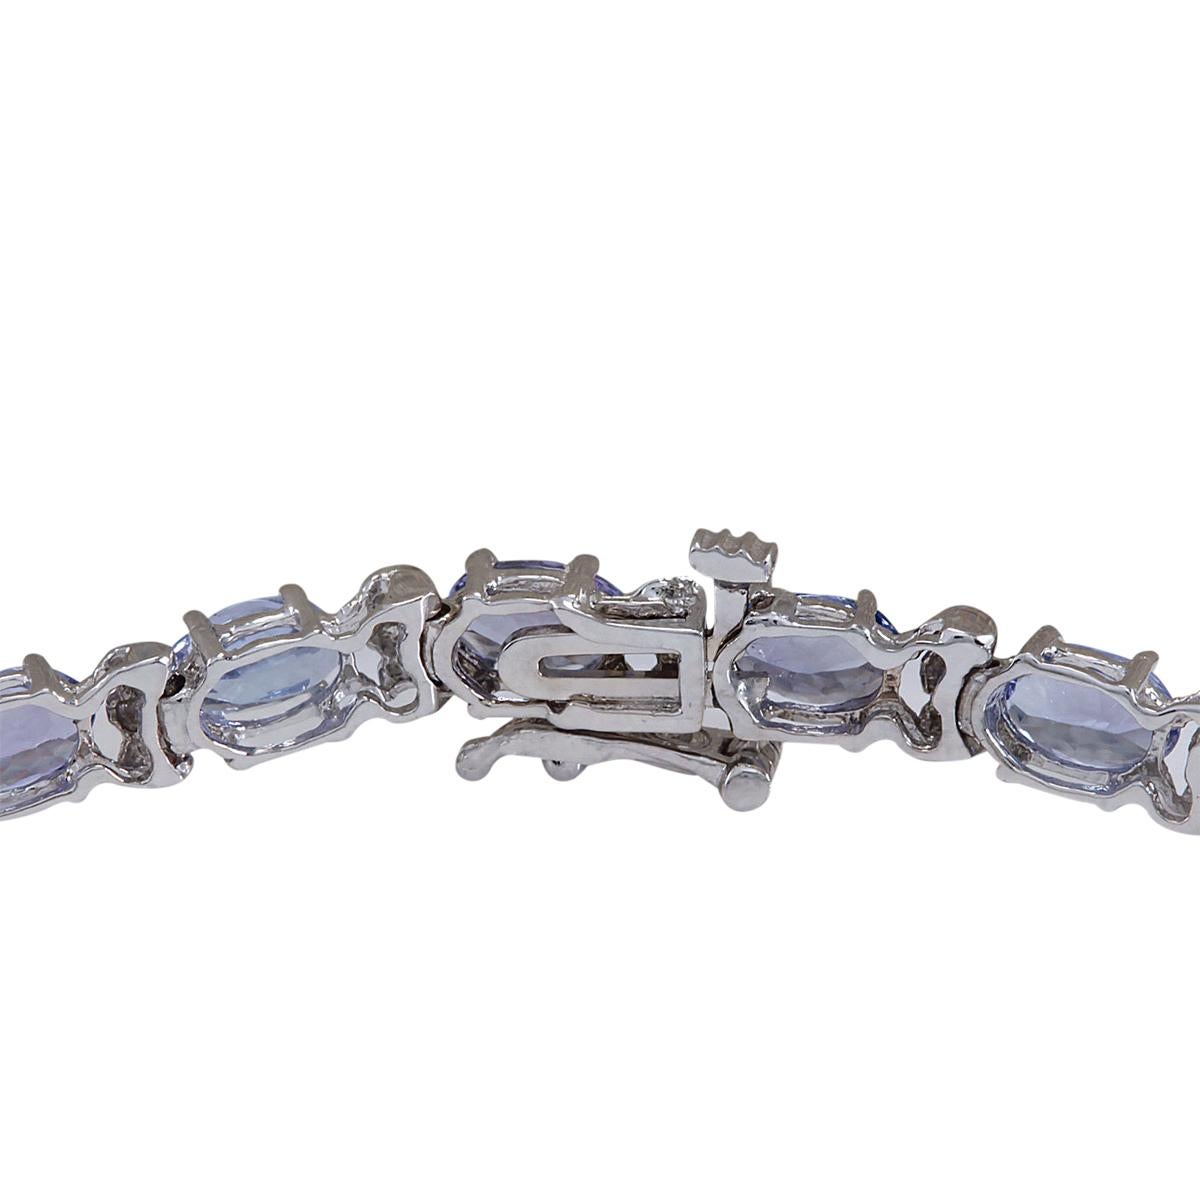 Stamped: 18K White Gold
Total Bracelet Weight: 8.1 Grams
Bracelet Length: 7.0 Inches
Bracelet Width: 4.65 mm
Gemstone Weight: Total Natural Tanzanite Weight is 8.74 Carat (Measures: 4.15x6.00 mm)
Color: Blue
Diamond Weight: Total Natural Diamond